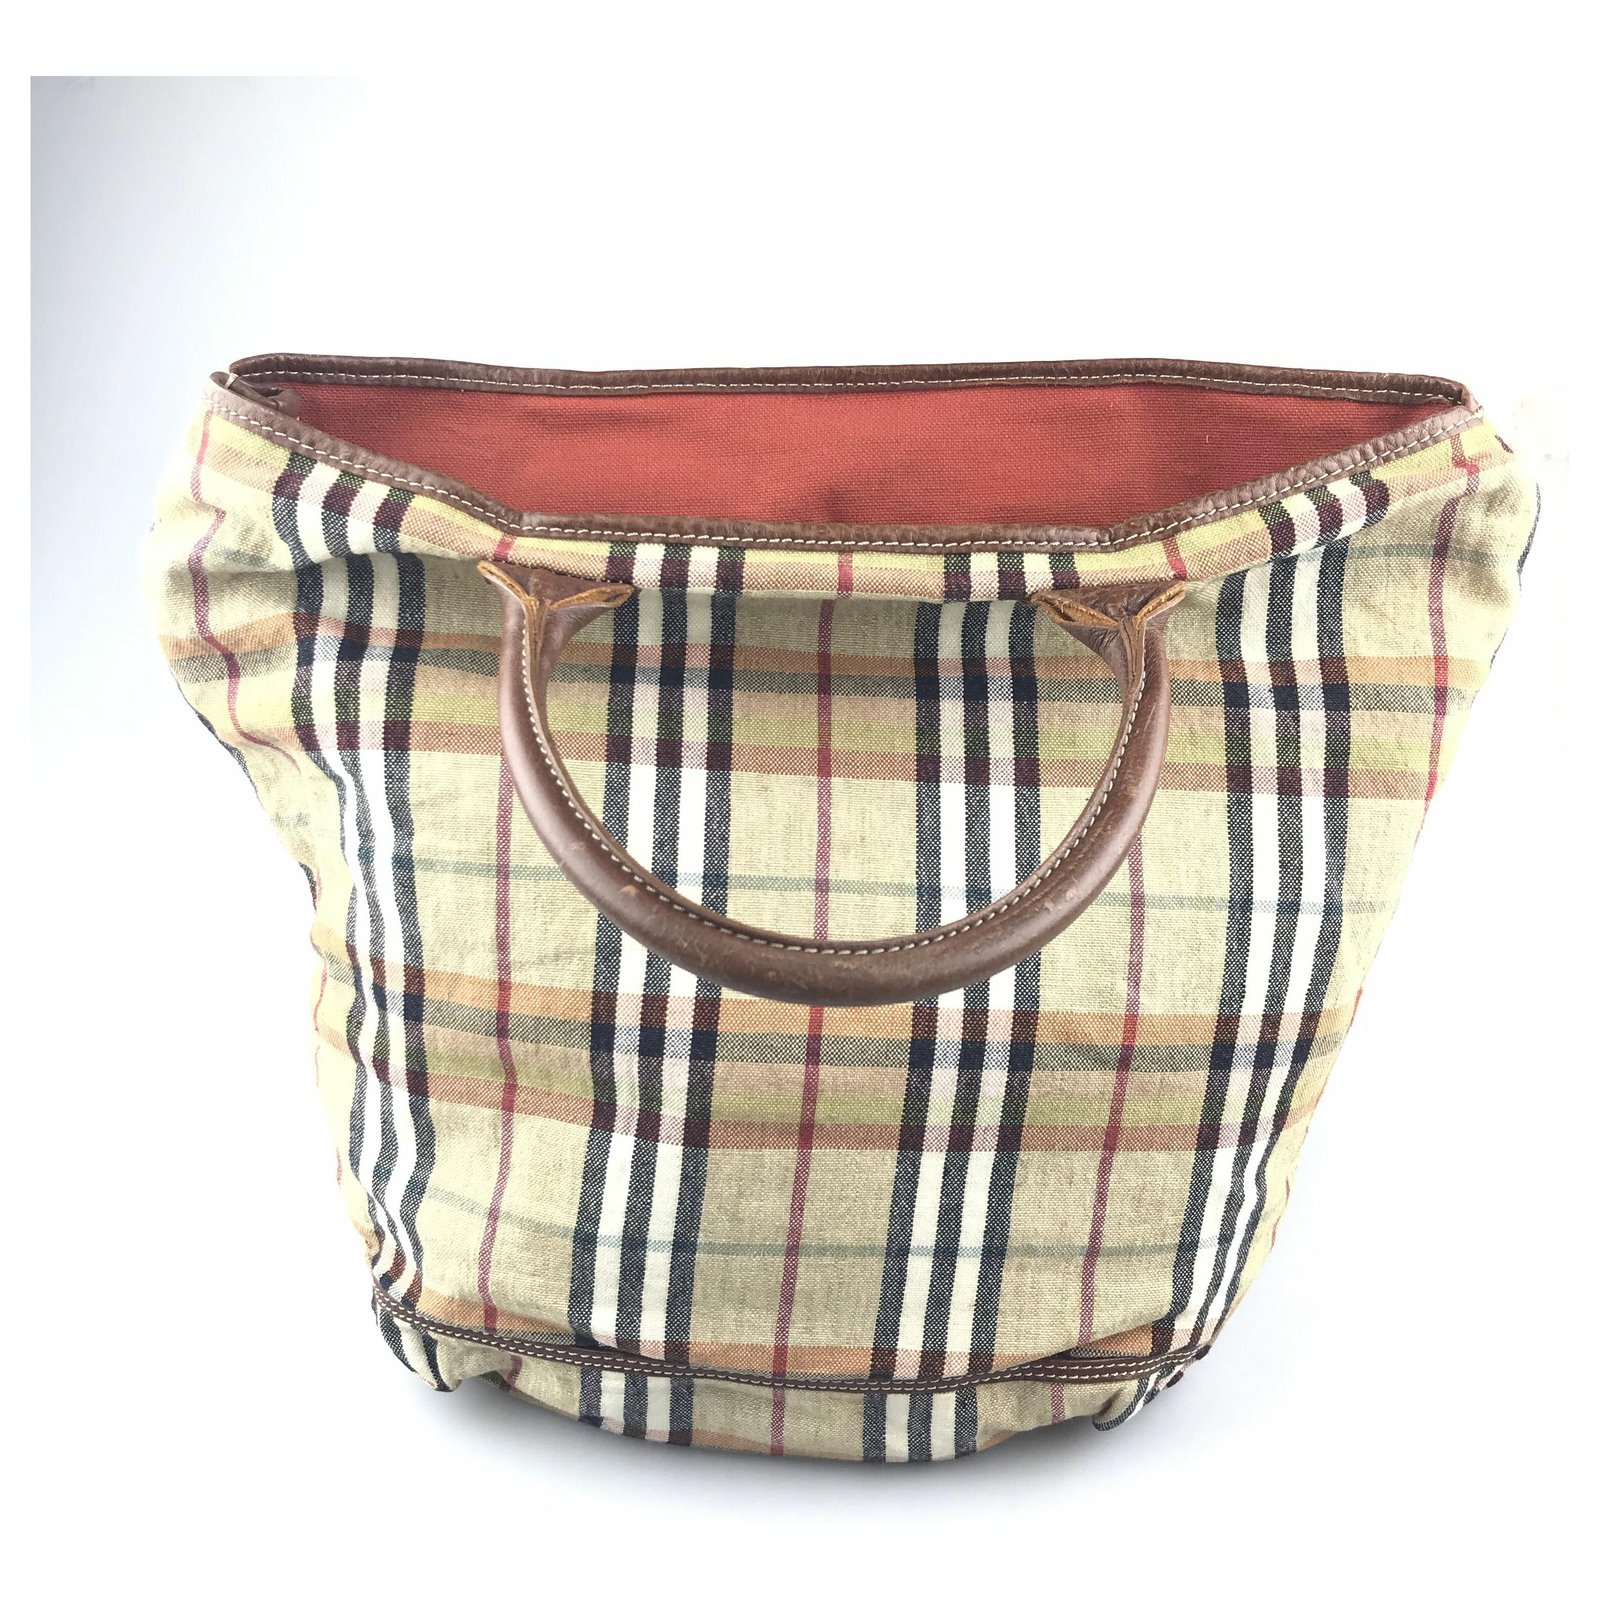 burberry house check tote